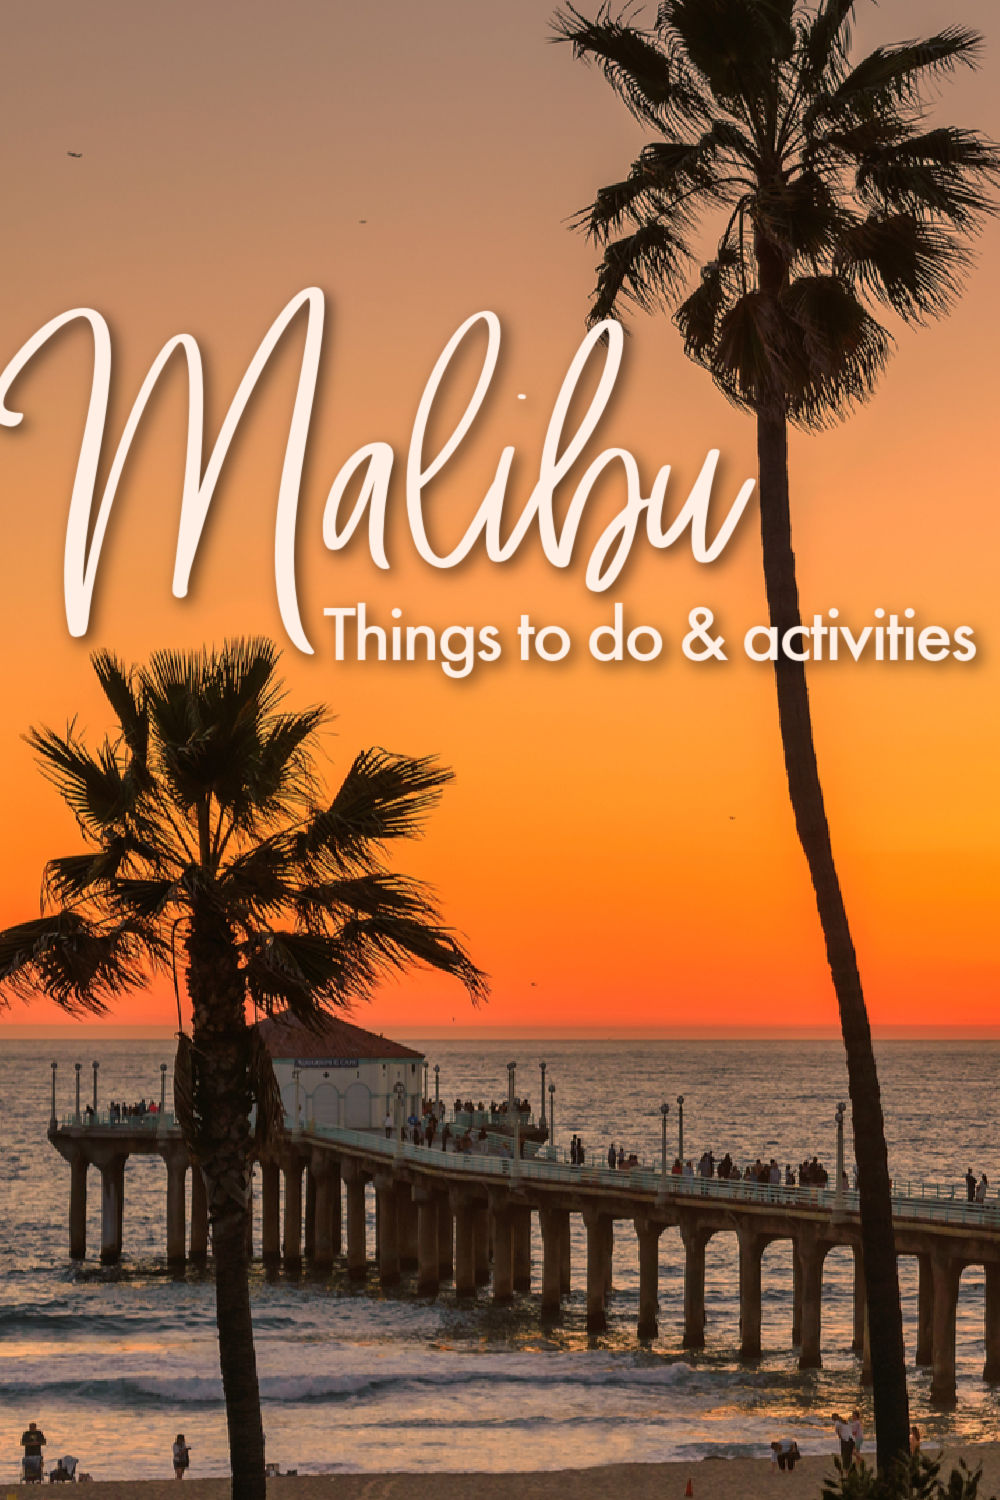 Your Malibu Guide is here! Follow our tips on what to do in Malibu and have fun. We listed the best things to do in Malibu, from beach and surfing to nature, hiking, and some of the best Malibu attractions. You will also find in this guide some suggestions for tours and Malibu activities and some of the best Malibu hotels to stay in. Enjoy it! 